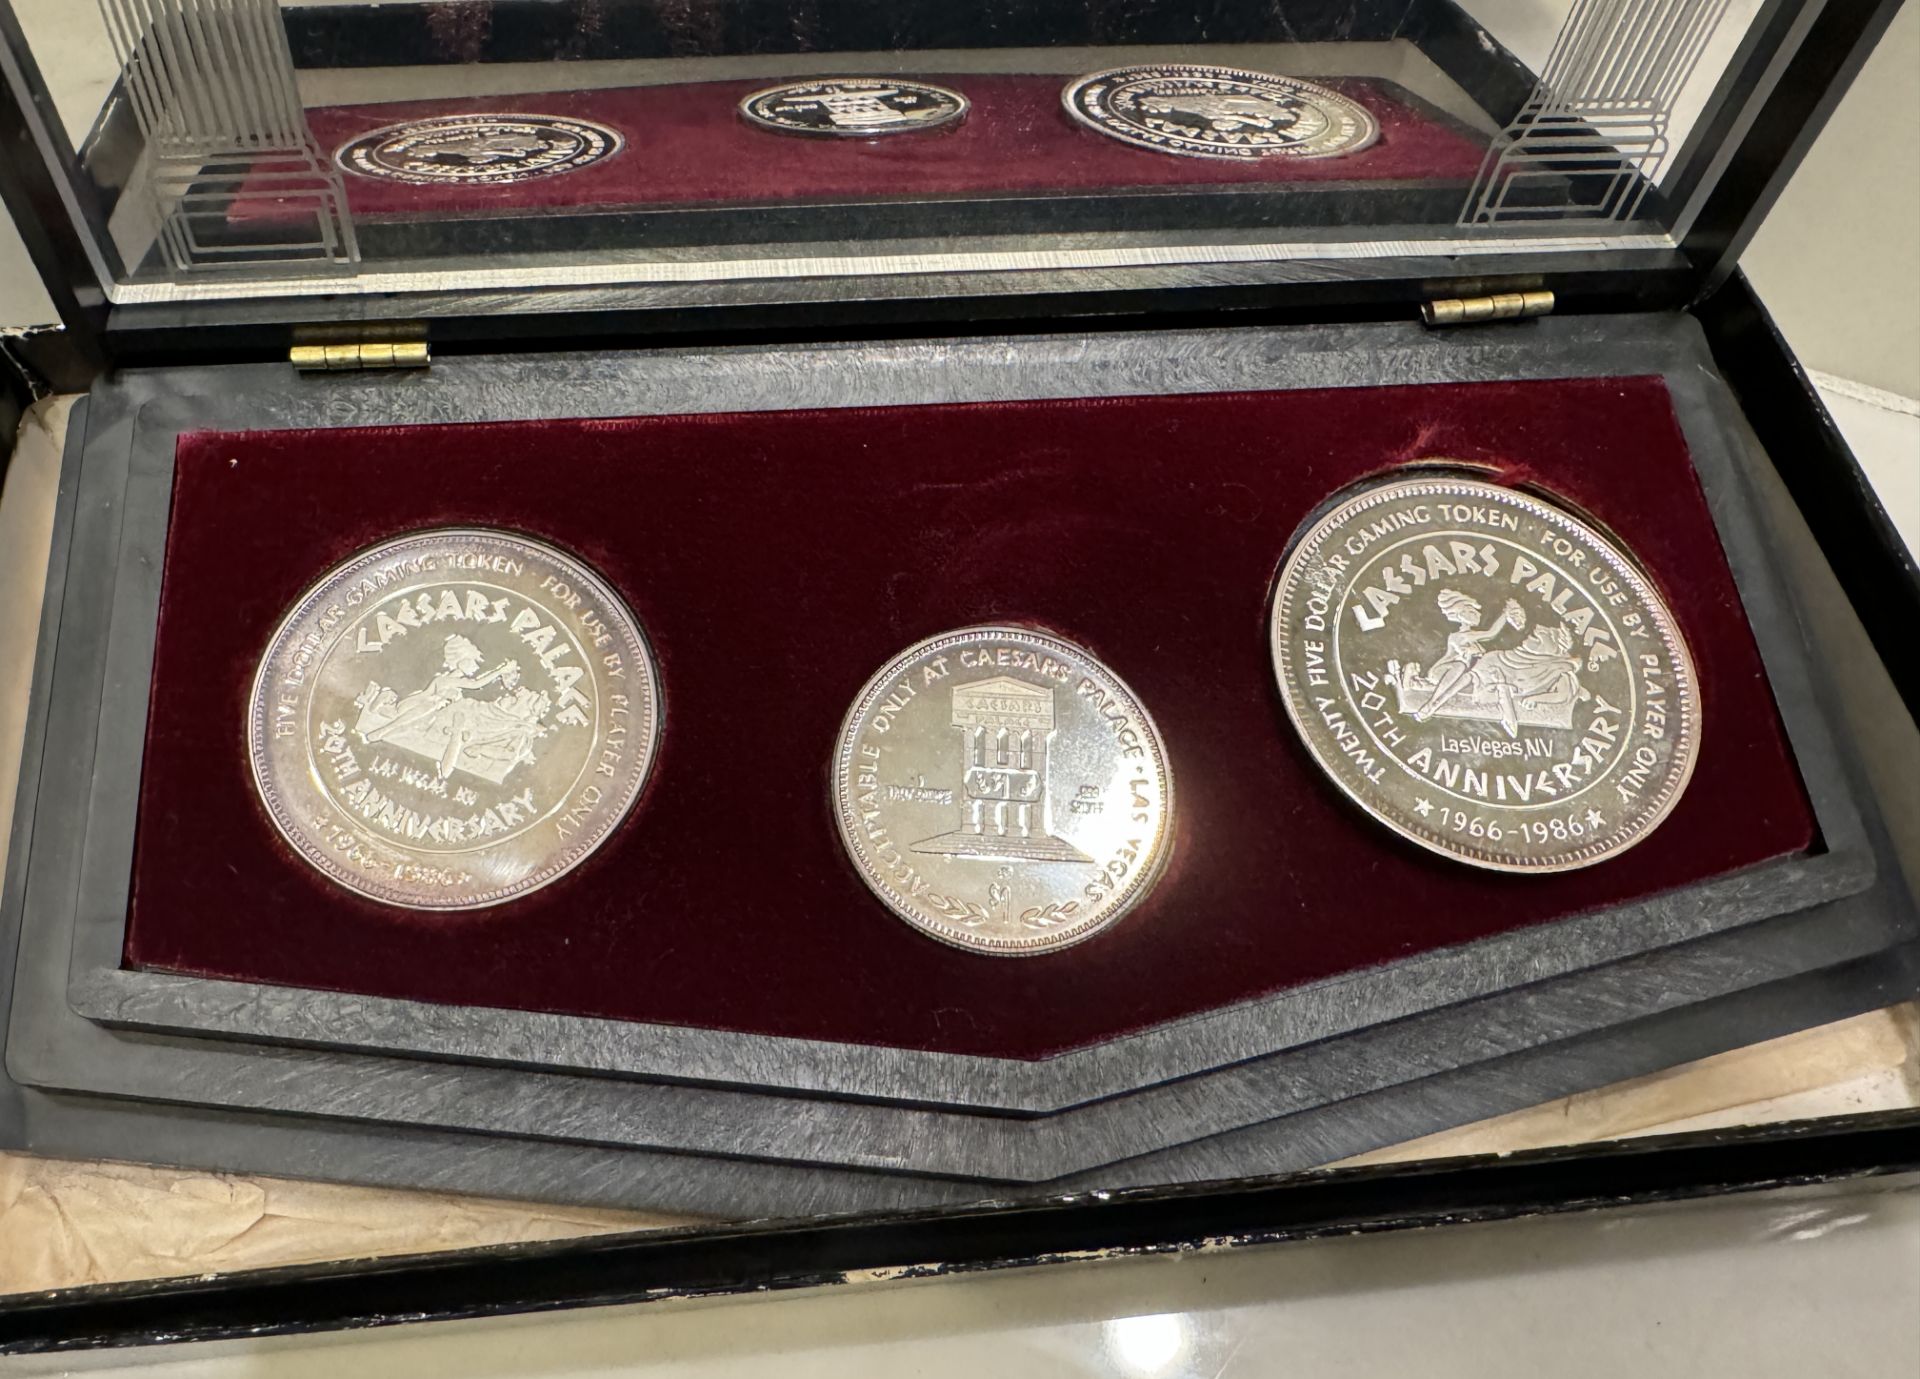 CAESARS PALACE .999 PURE SILVER 20TH ANNIVERSARY COINS $1-$5-$25 CASINO TOKENS - Image 3 of 3